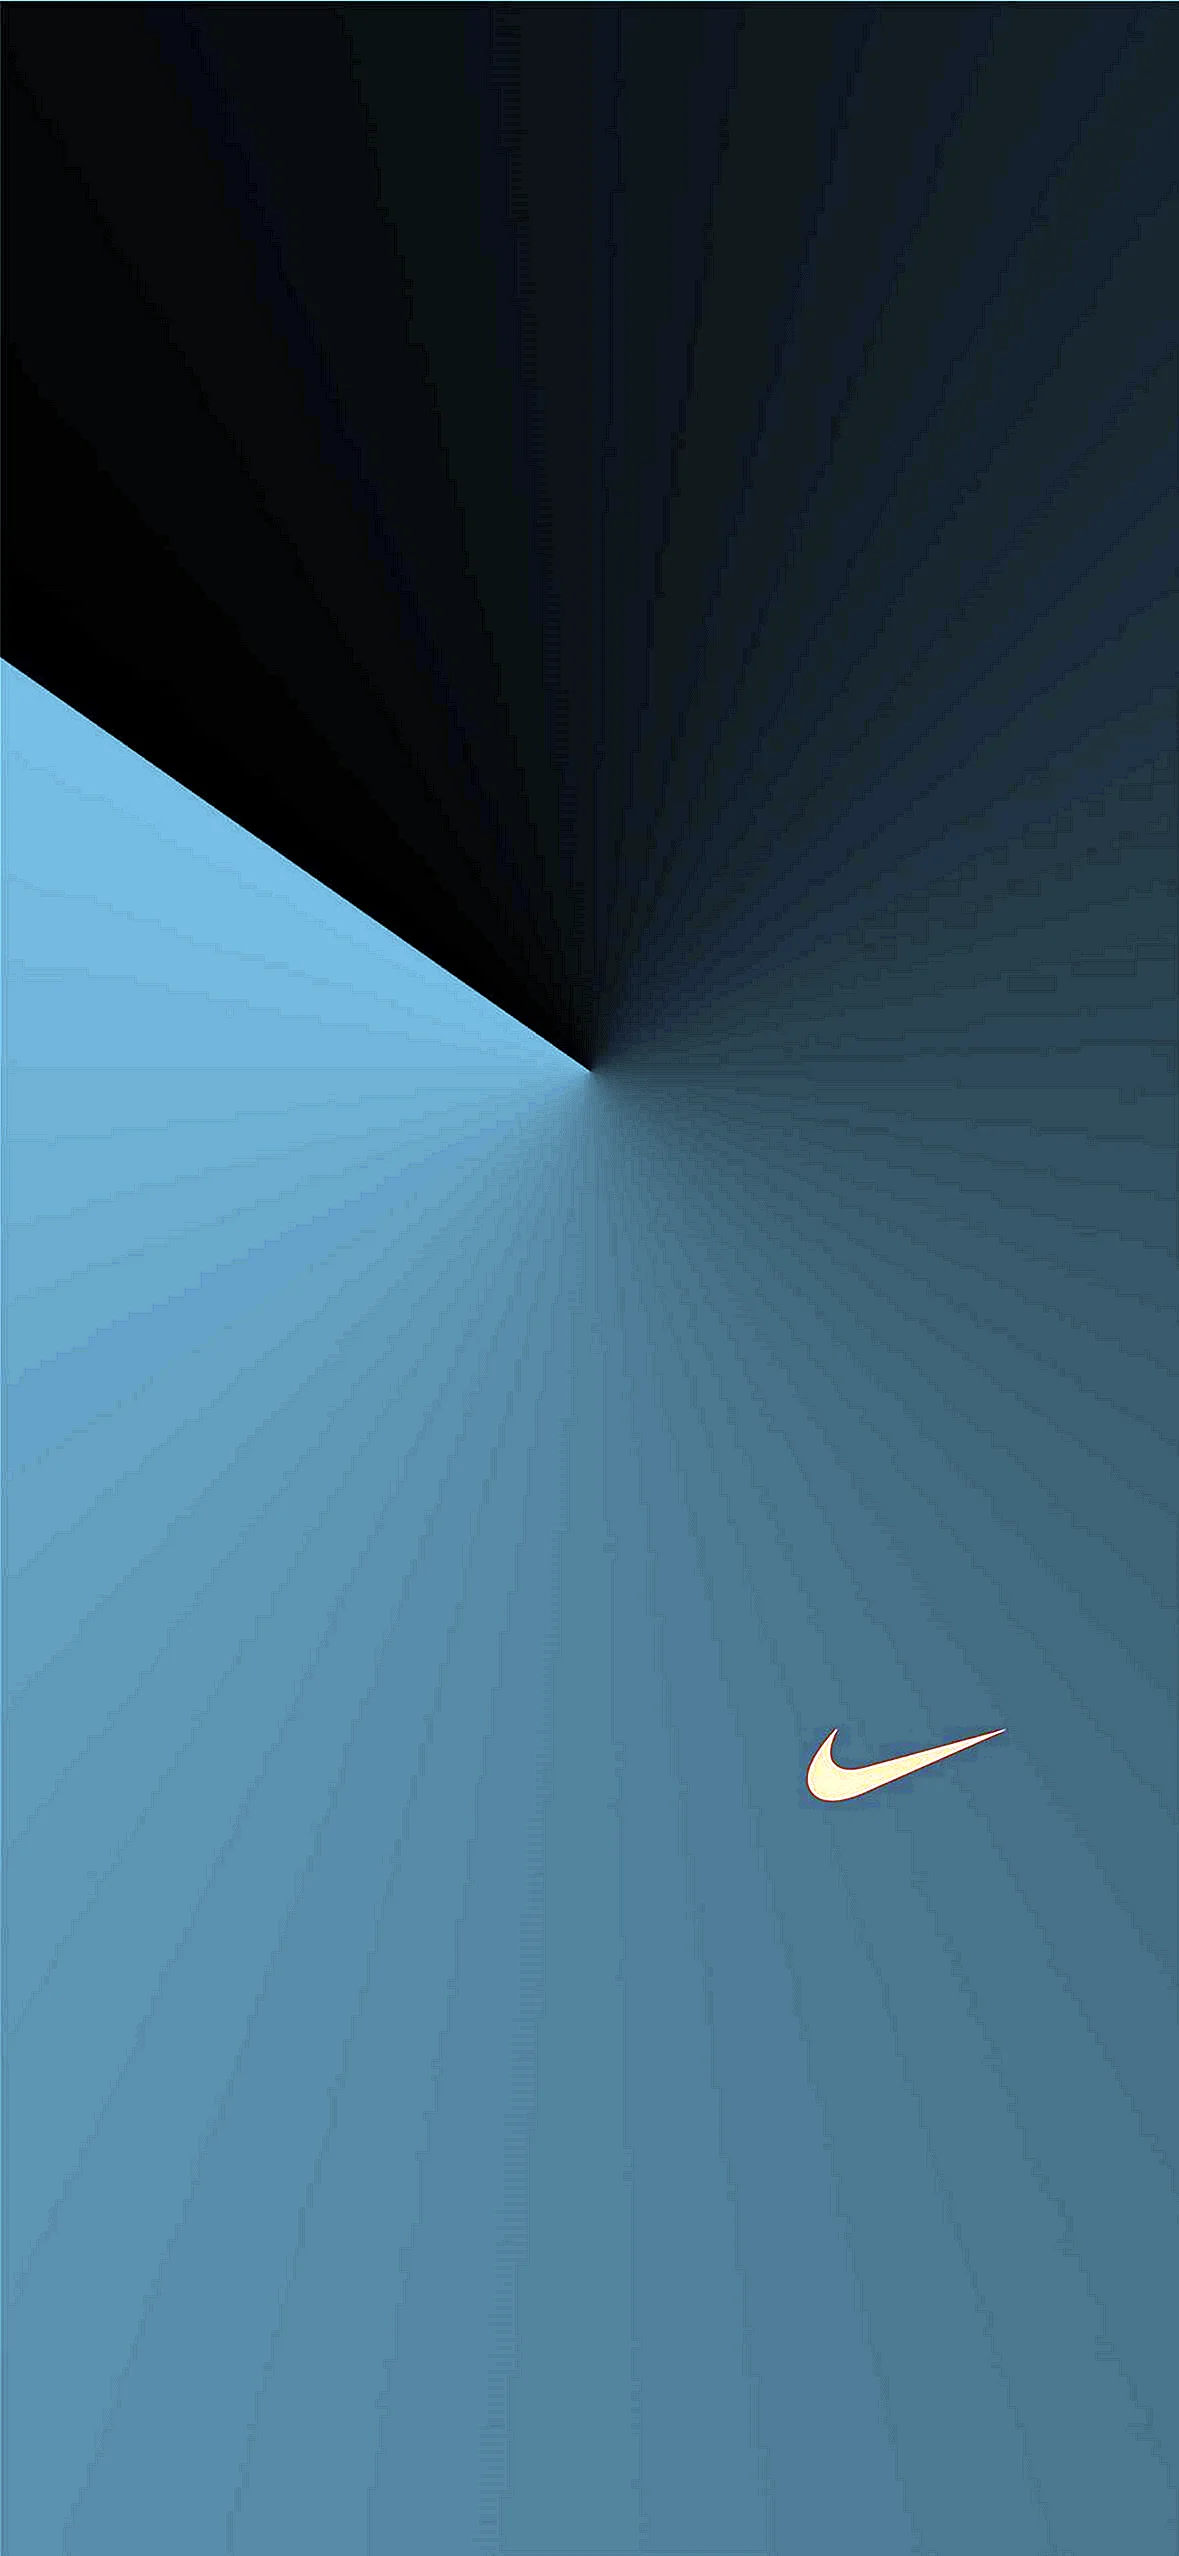 Nike Background Iphone Wallpaper for iPhone 14 Pro